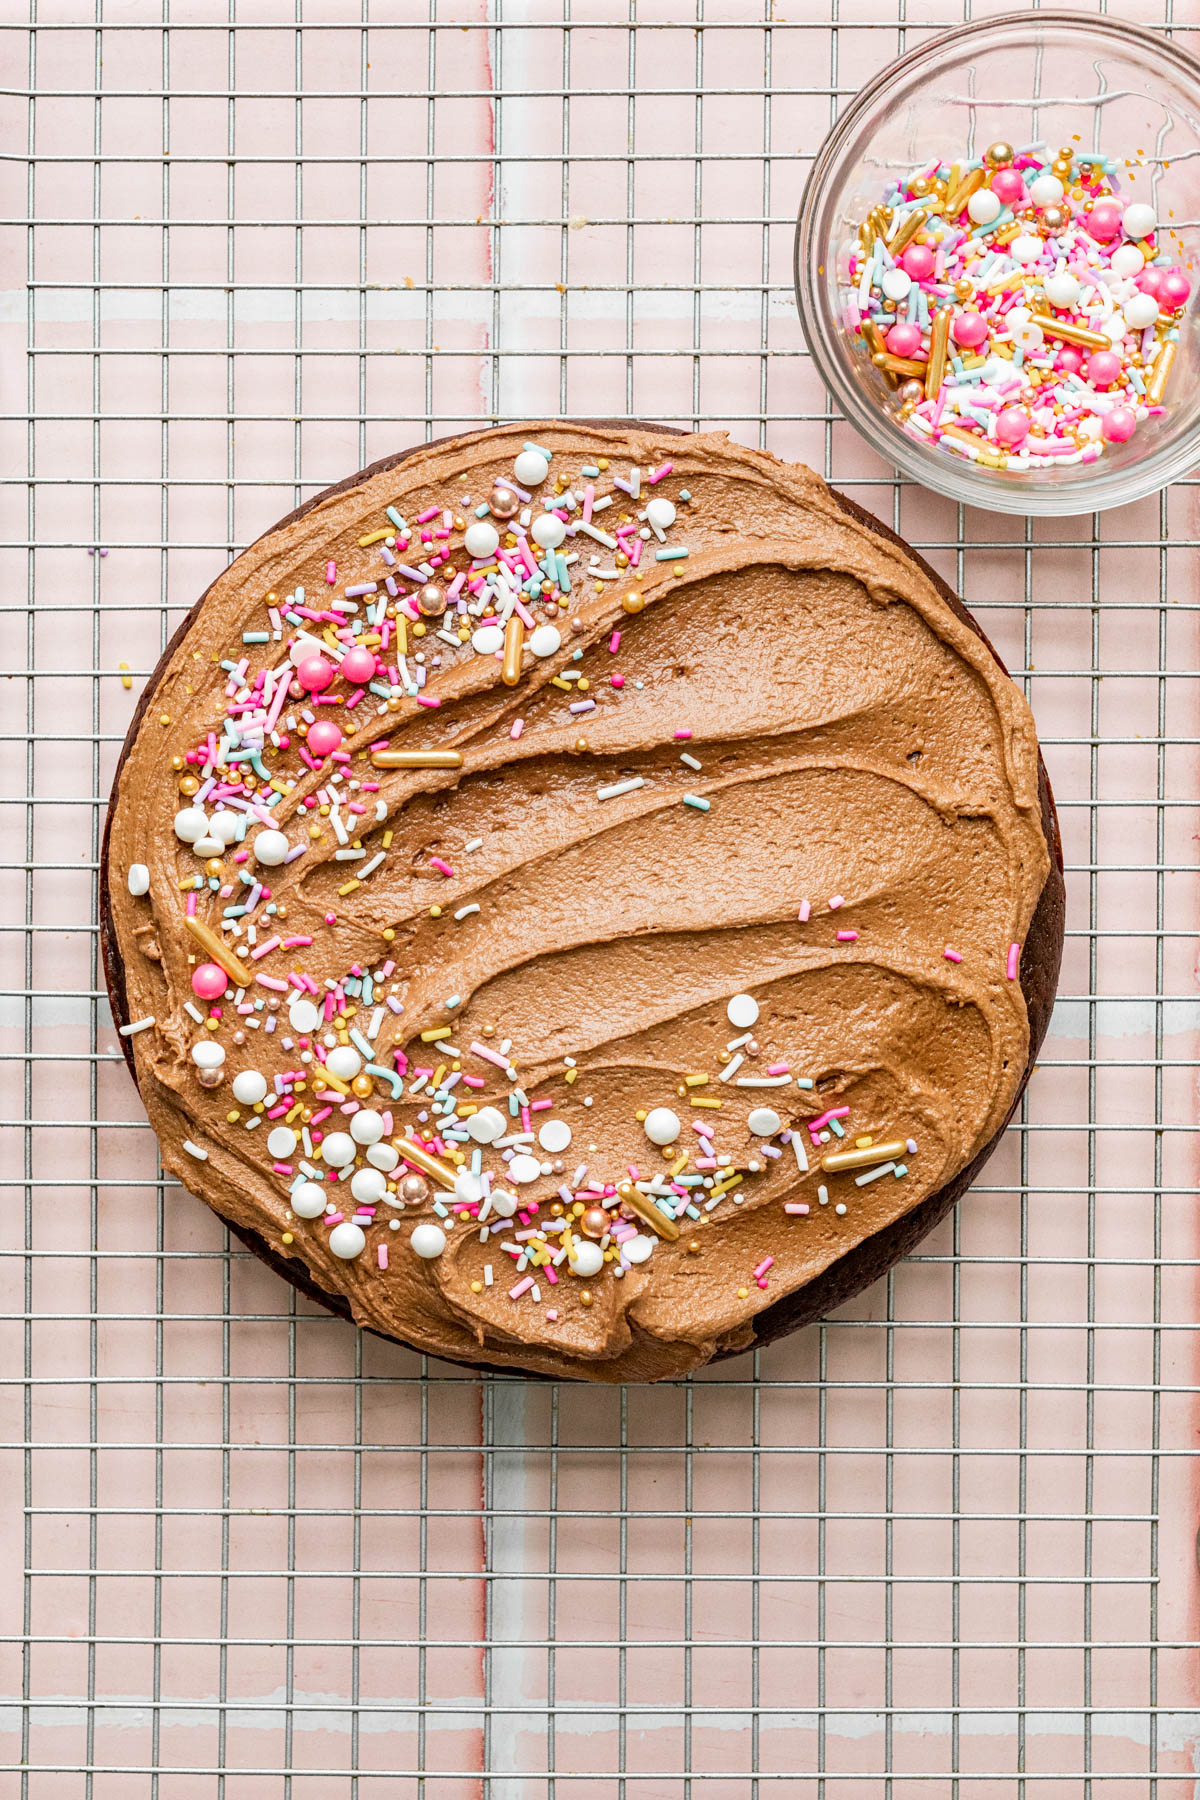 A frosted vegan chocolate cake on a wire cooling rack with a small bowl of sprinkles nearby.